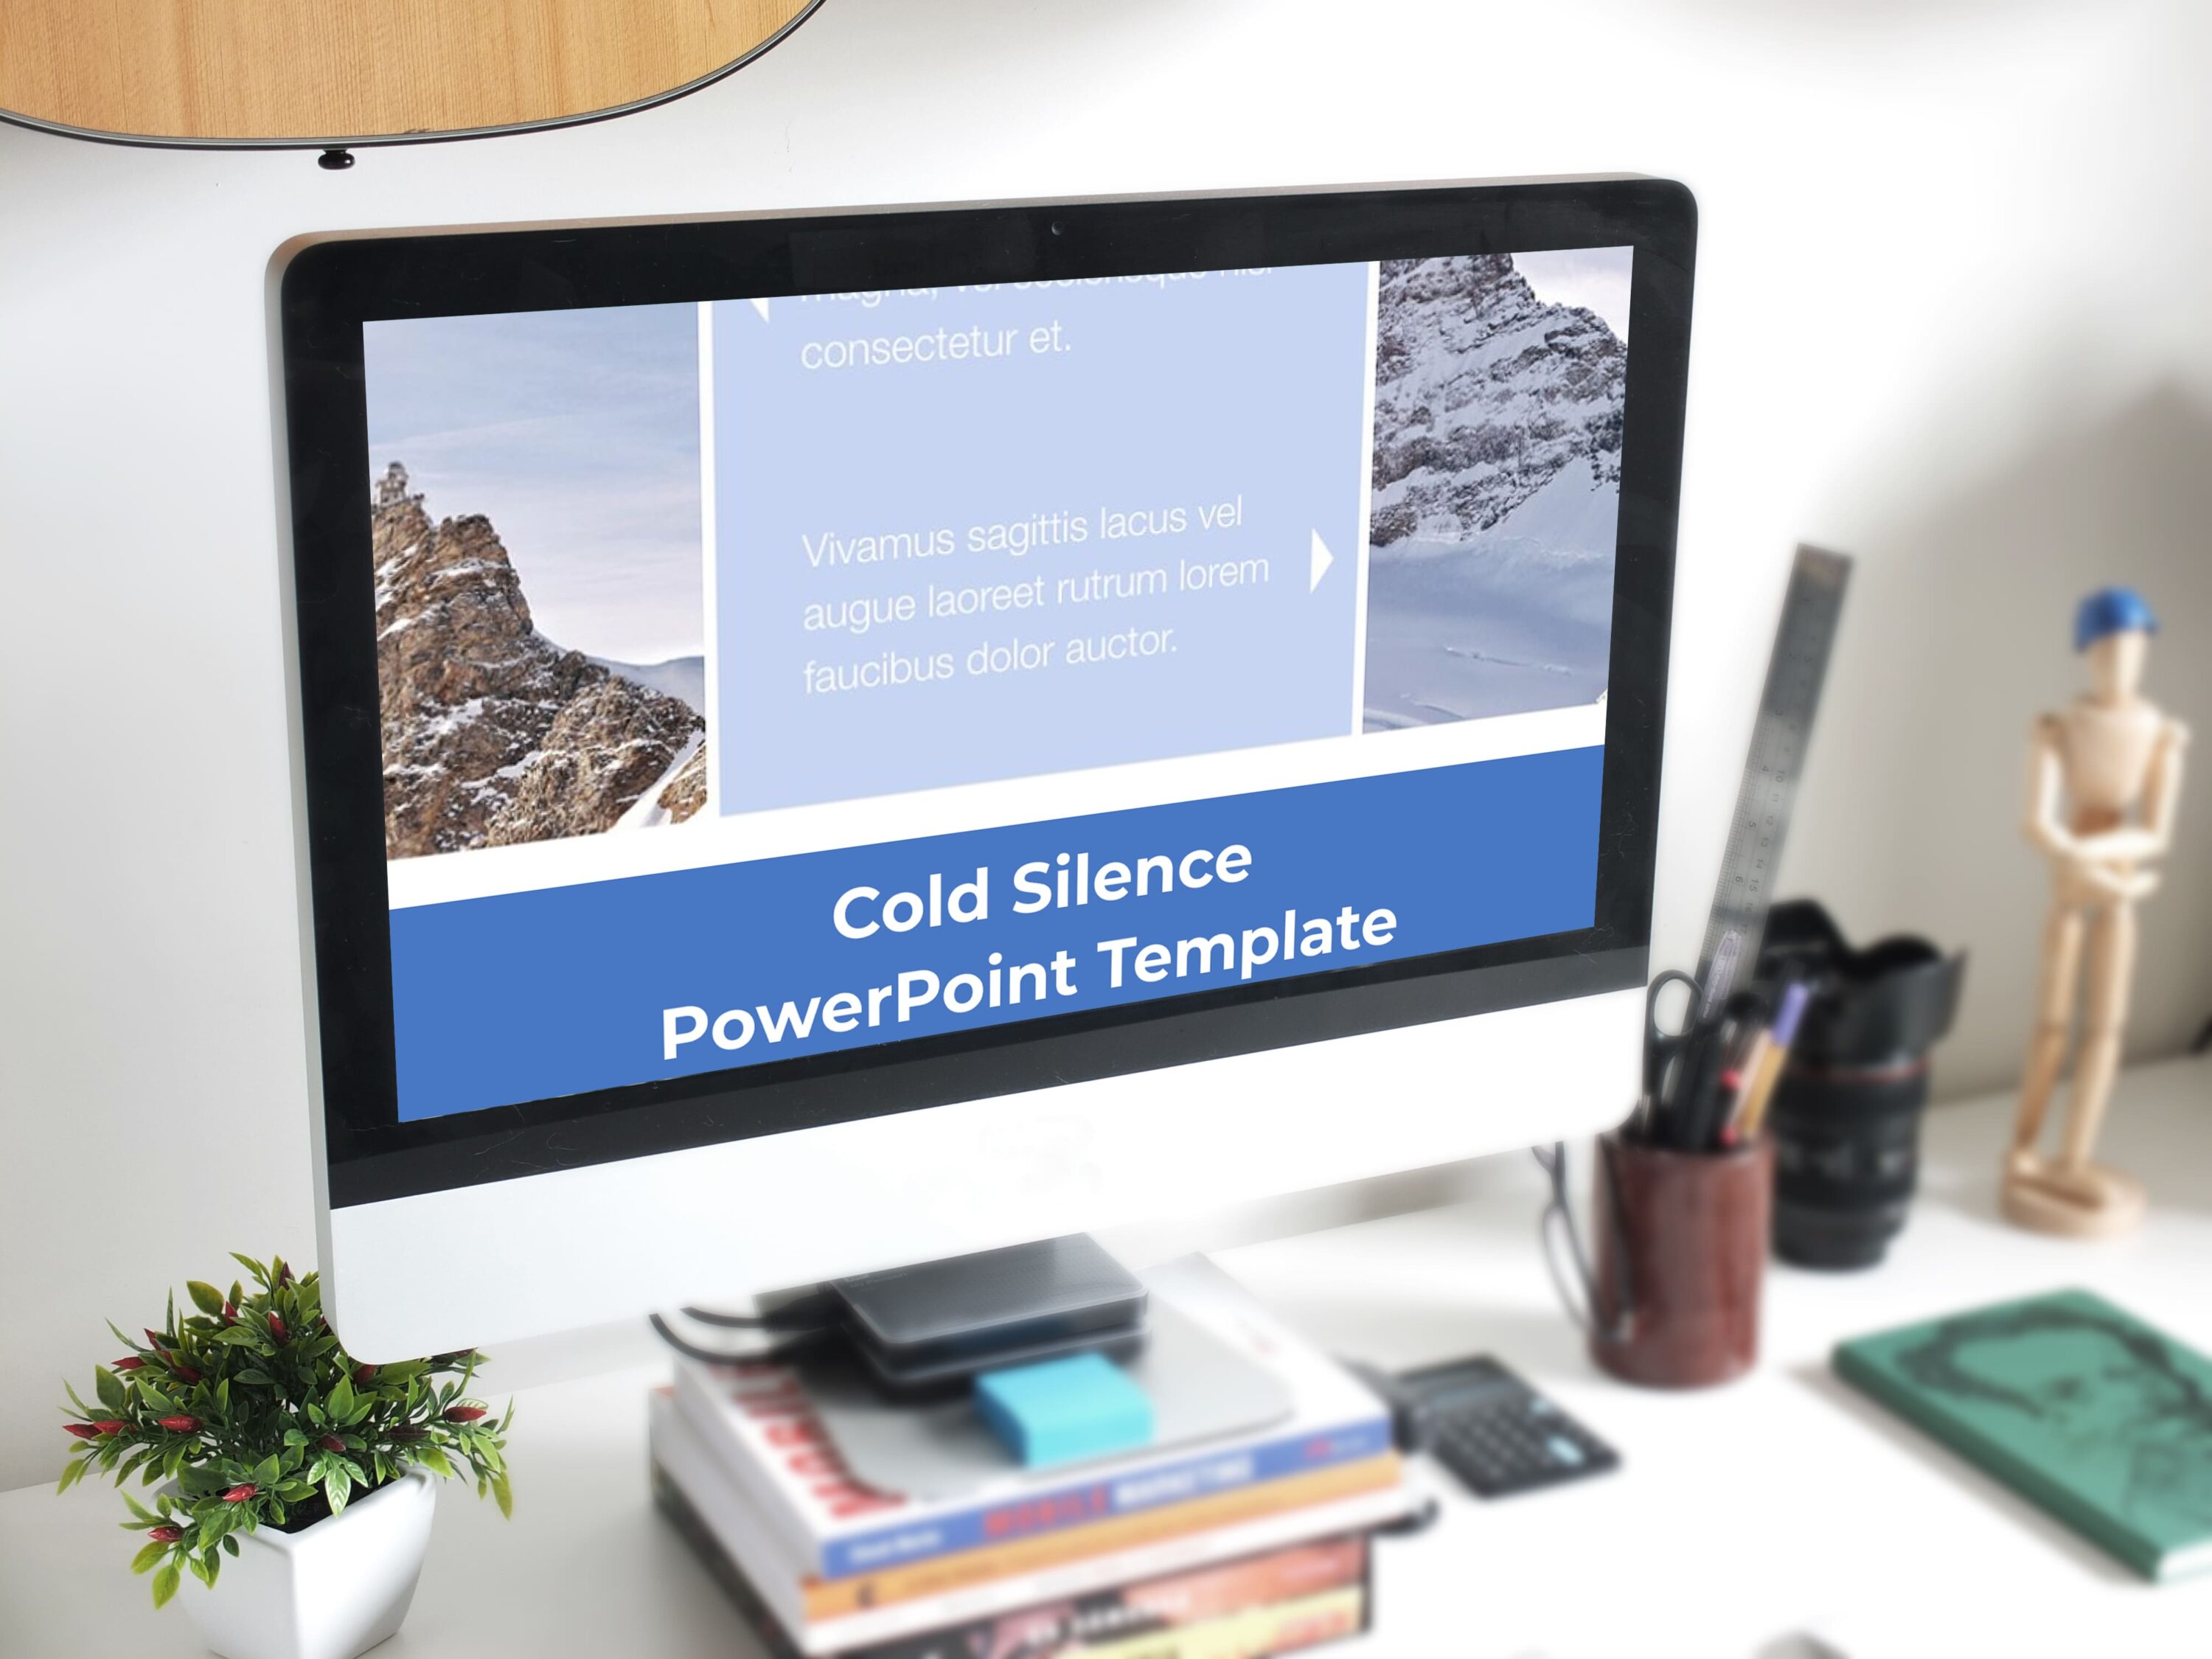 Cold Silence PowerPoint Template - Mockup on Desktop.